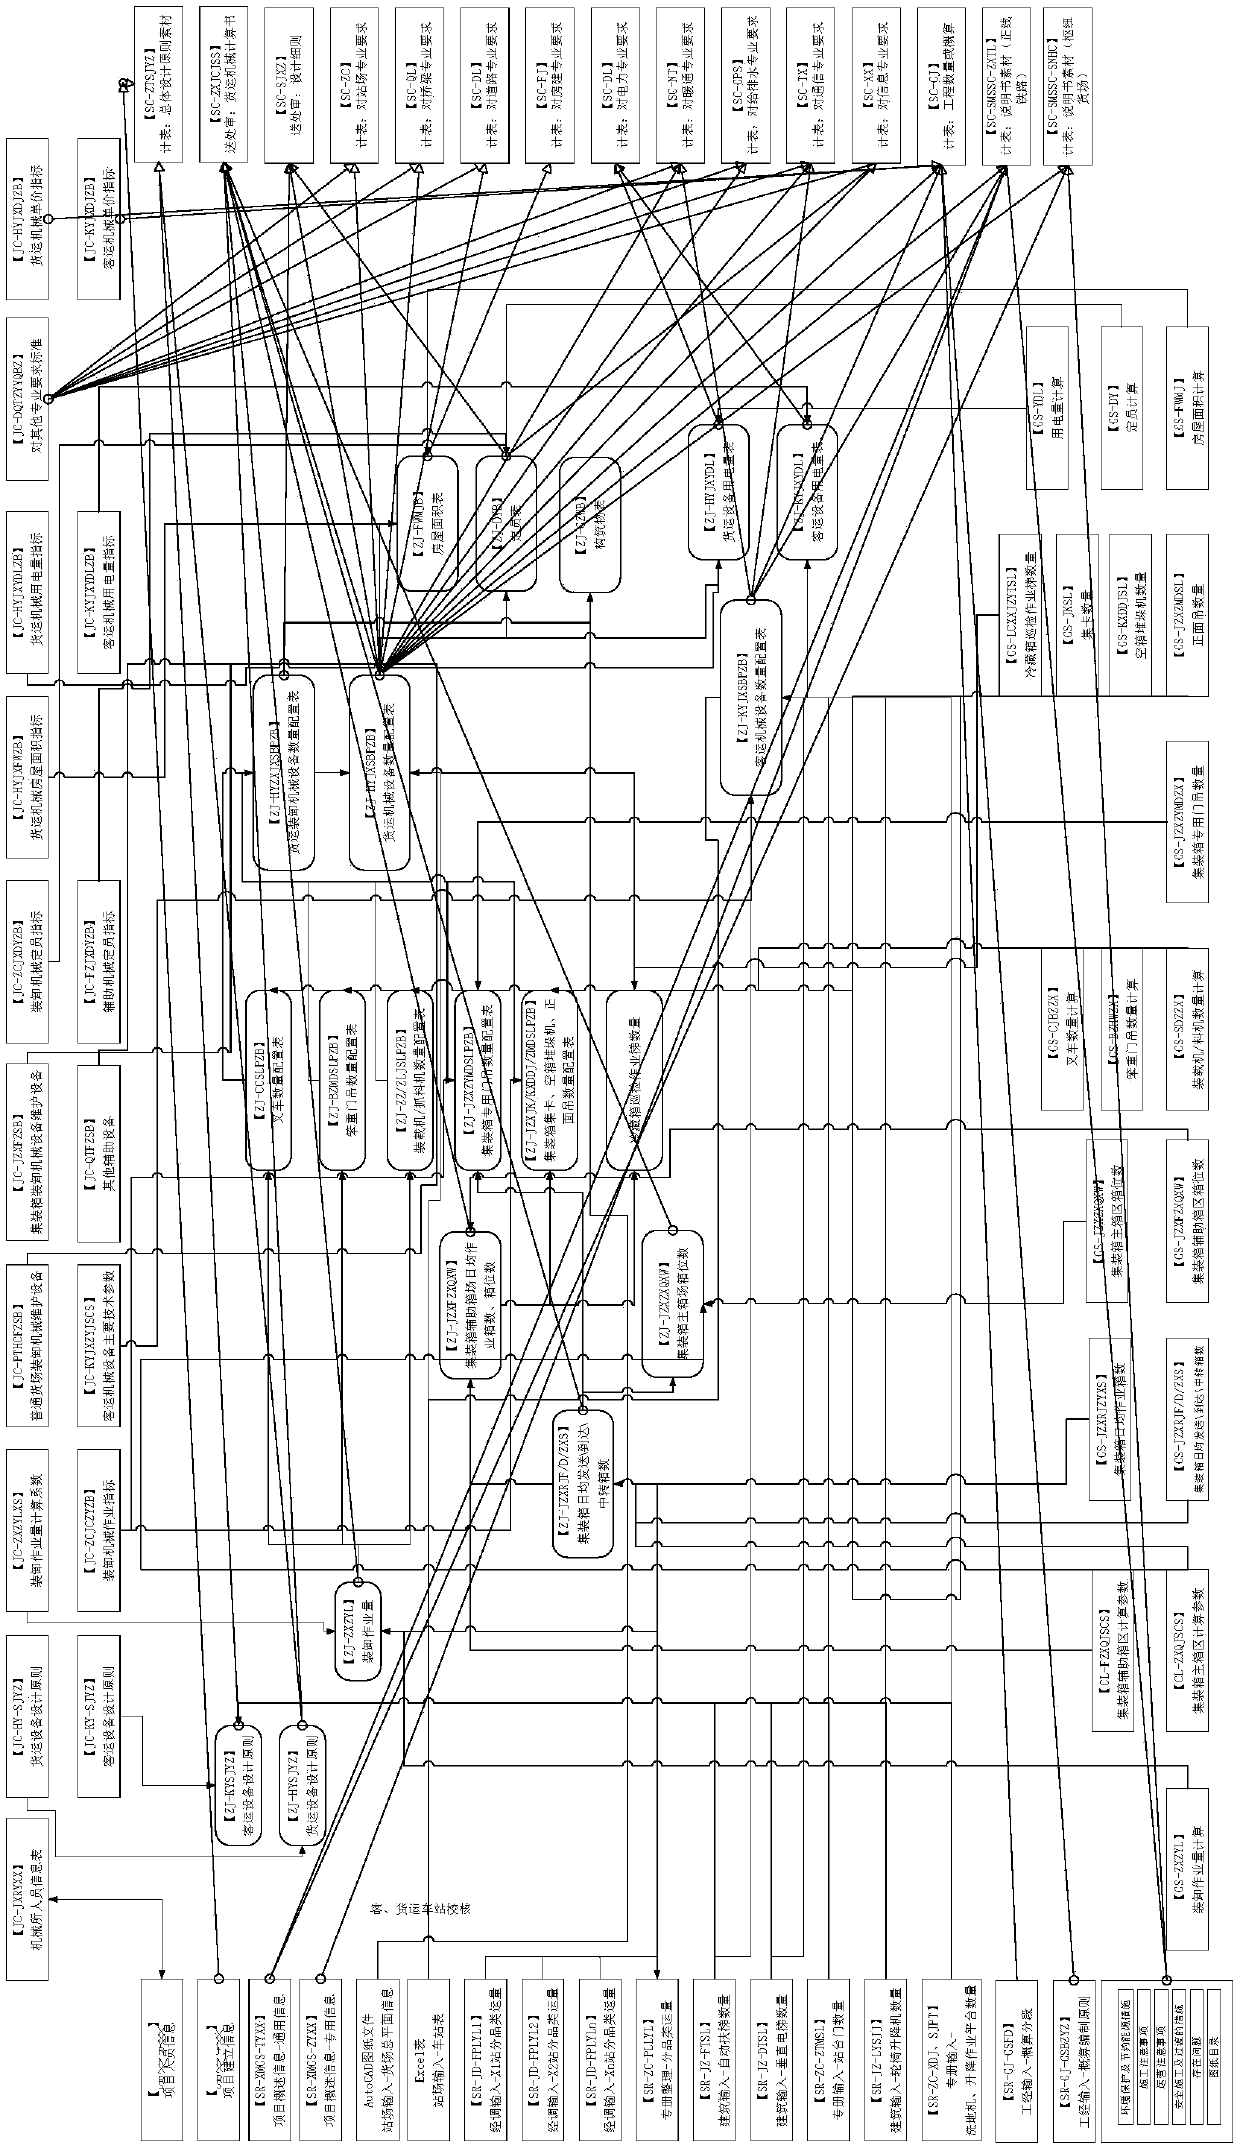 Whole-process auxiliary design system for railway passenger and freight equipment